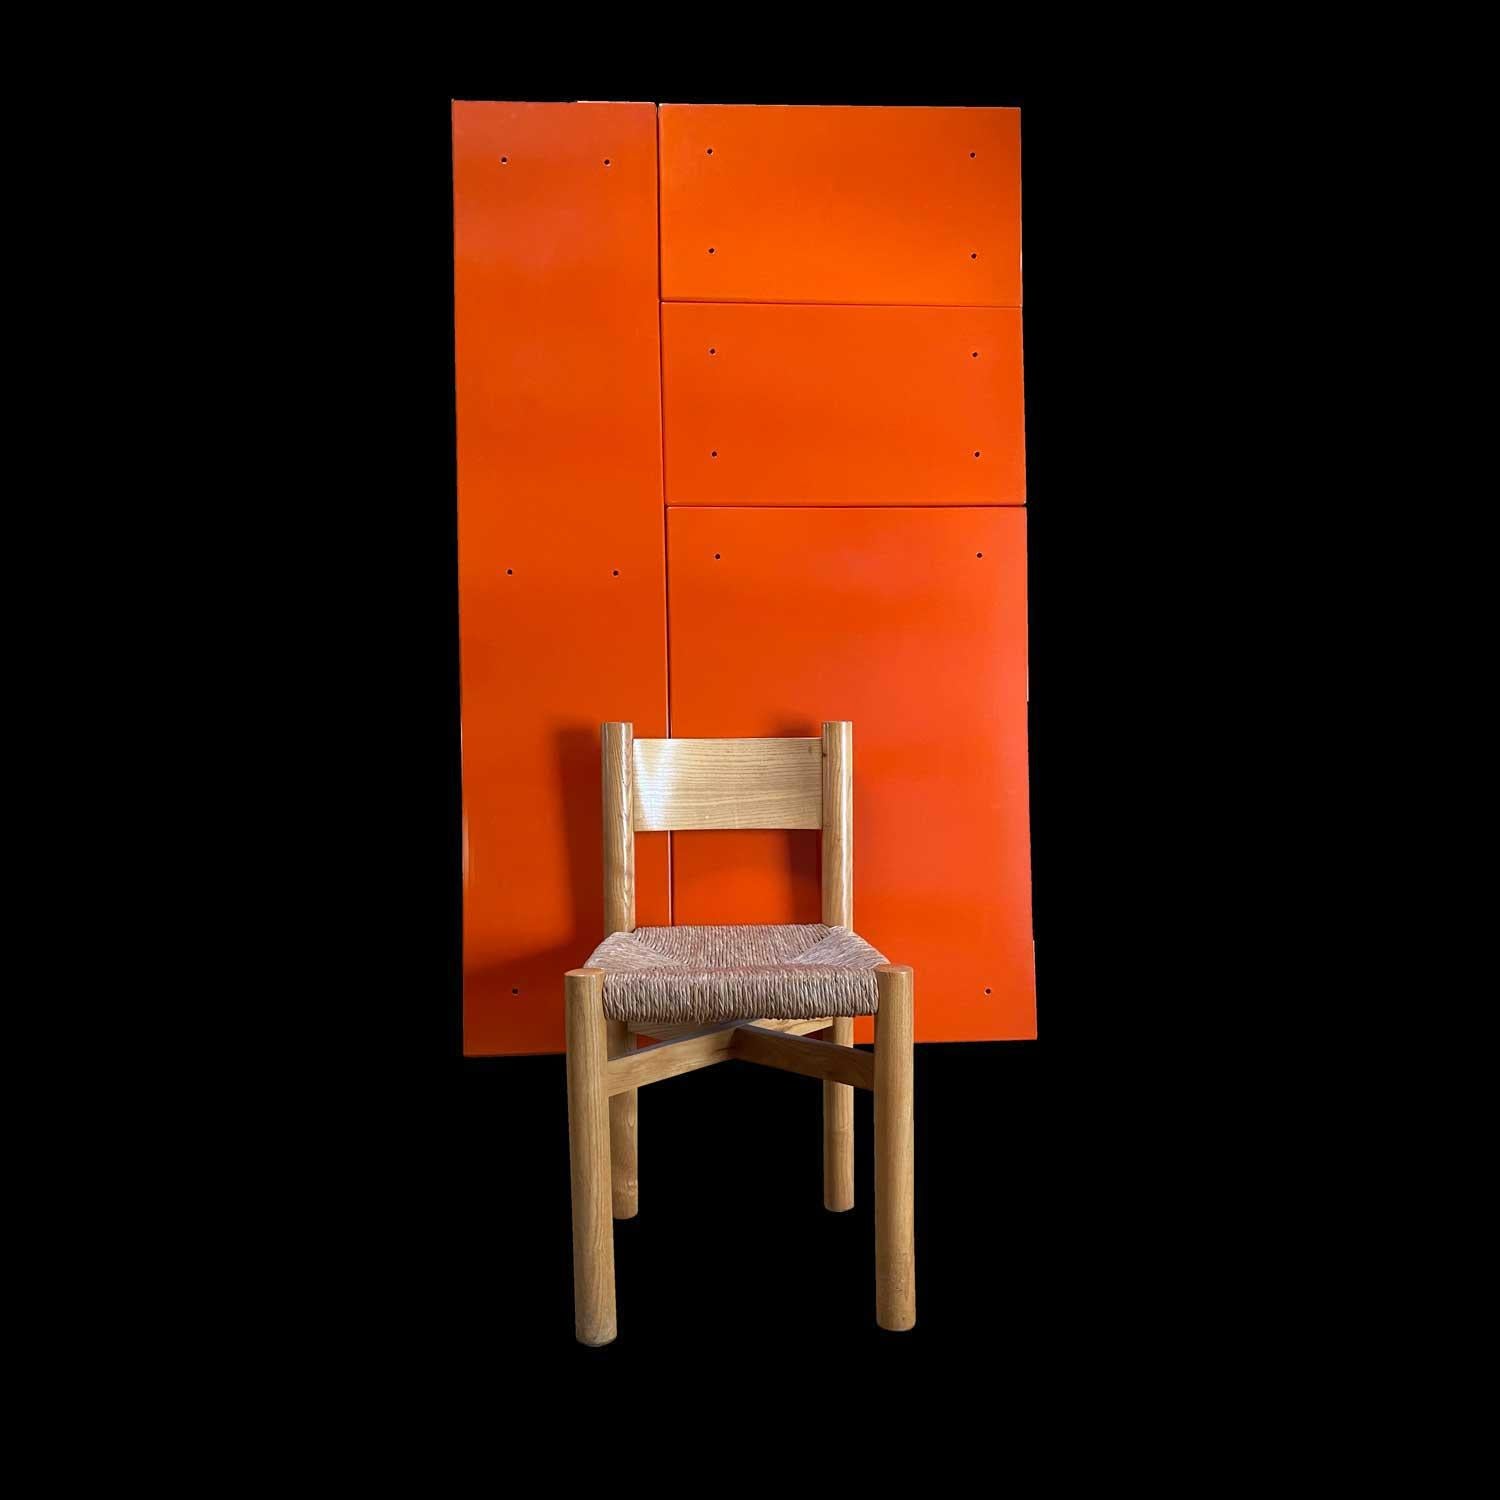 Charlotte Perriand 
set of orange sheet metal panels from the arcs ski resort in 1968
perfect condition
the interior designs made by Charlotte Perriand always bring an artistic dimension. In addition to the color, these panels are made on the golden